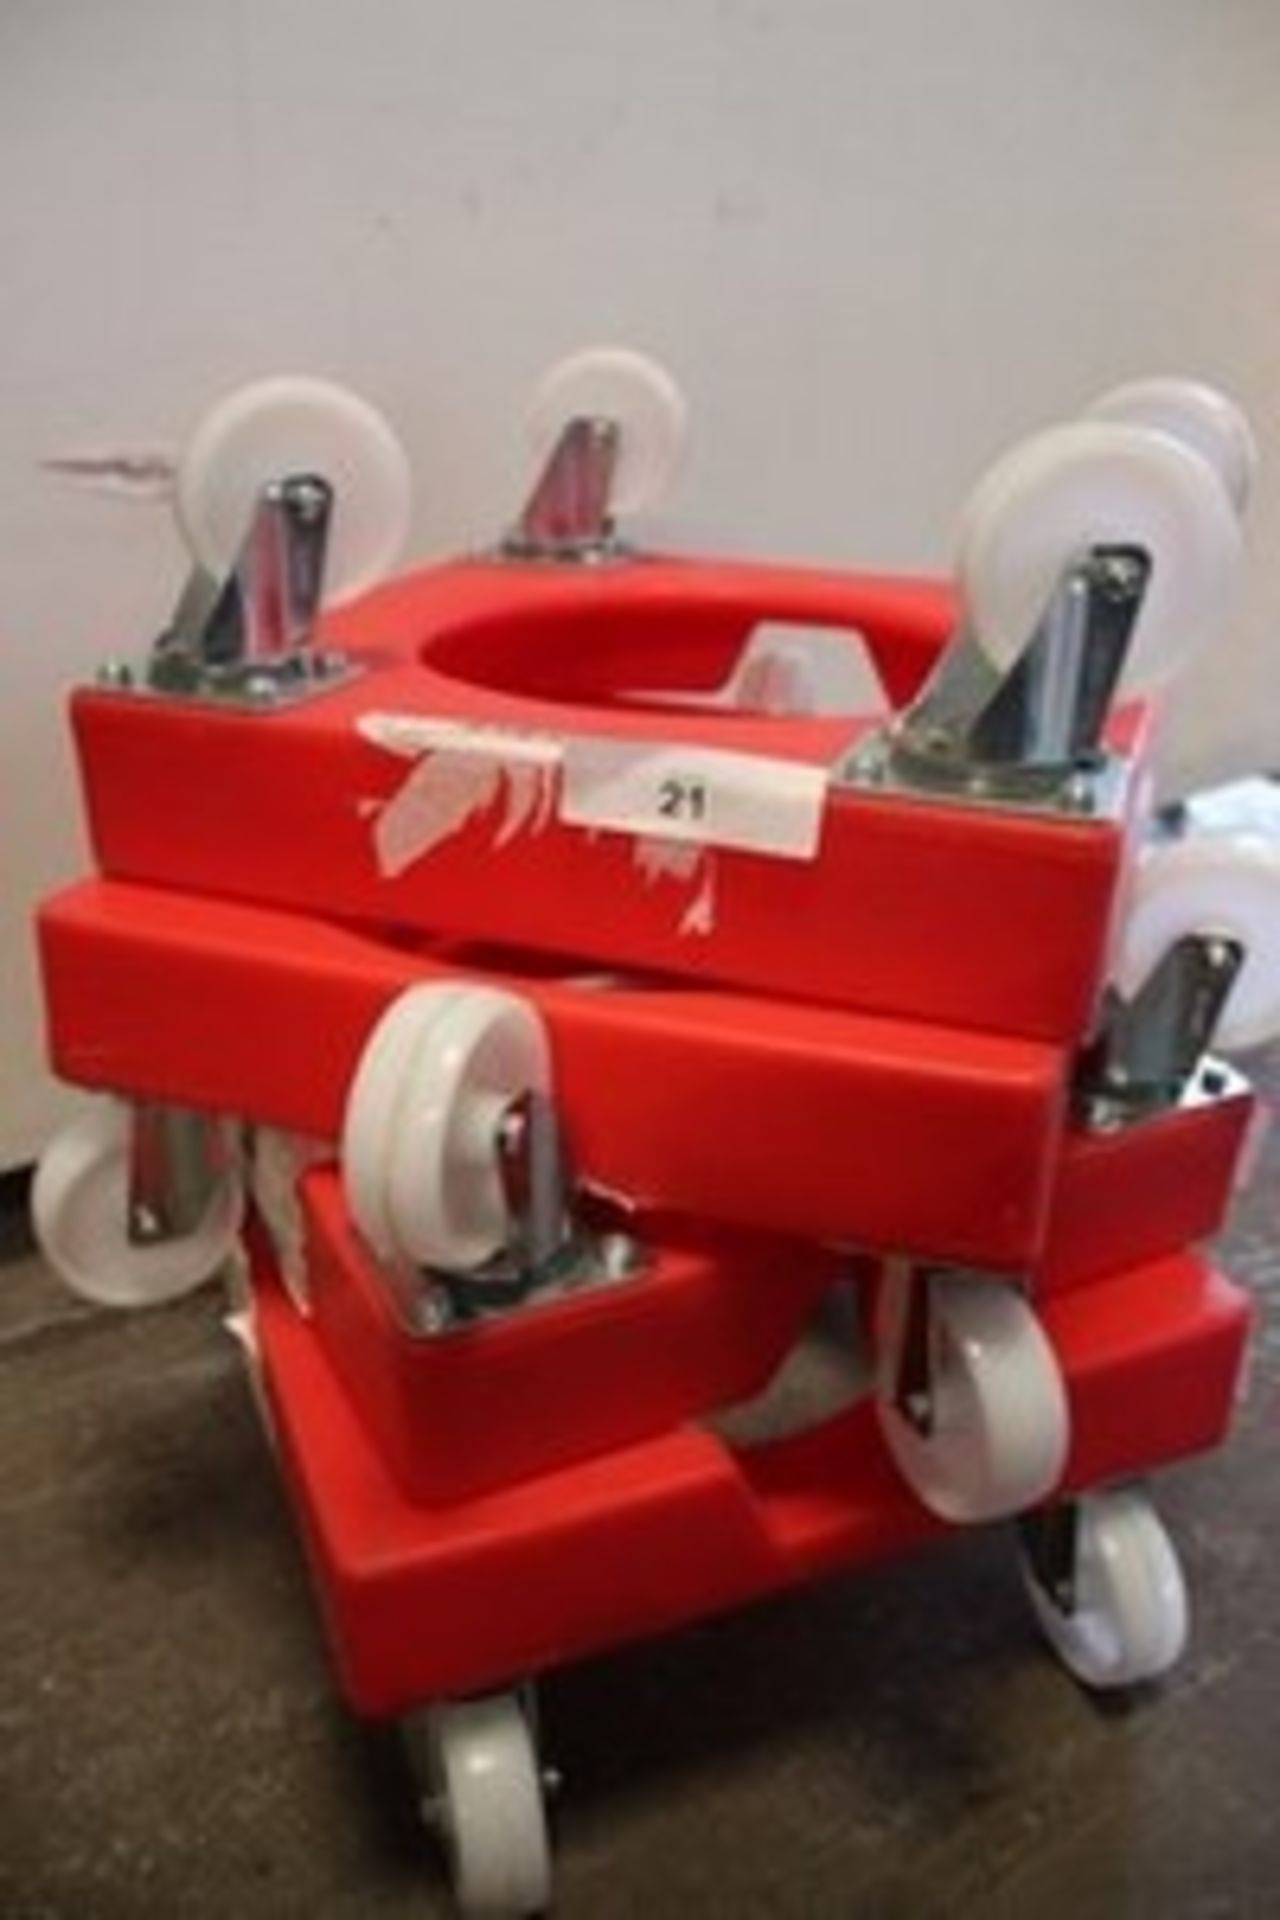 4 x red barrel trolleys, approximately 50cm square - Second-hand (SWC5)